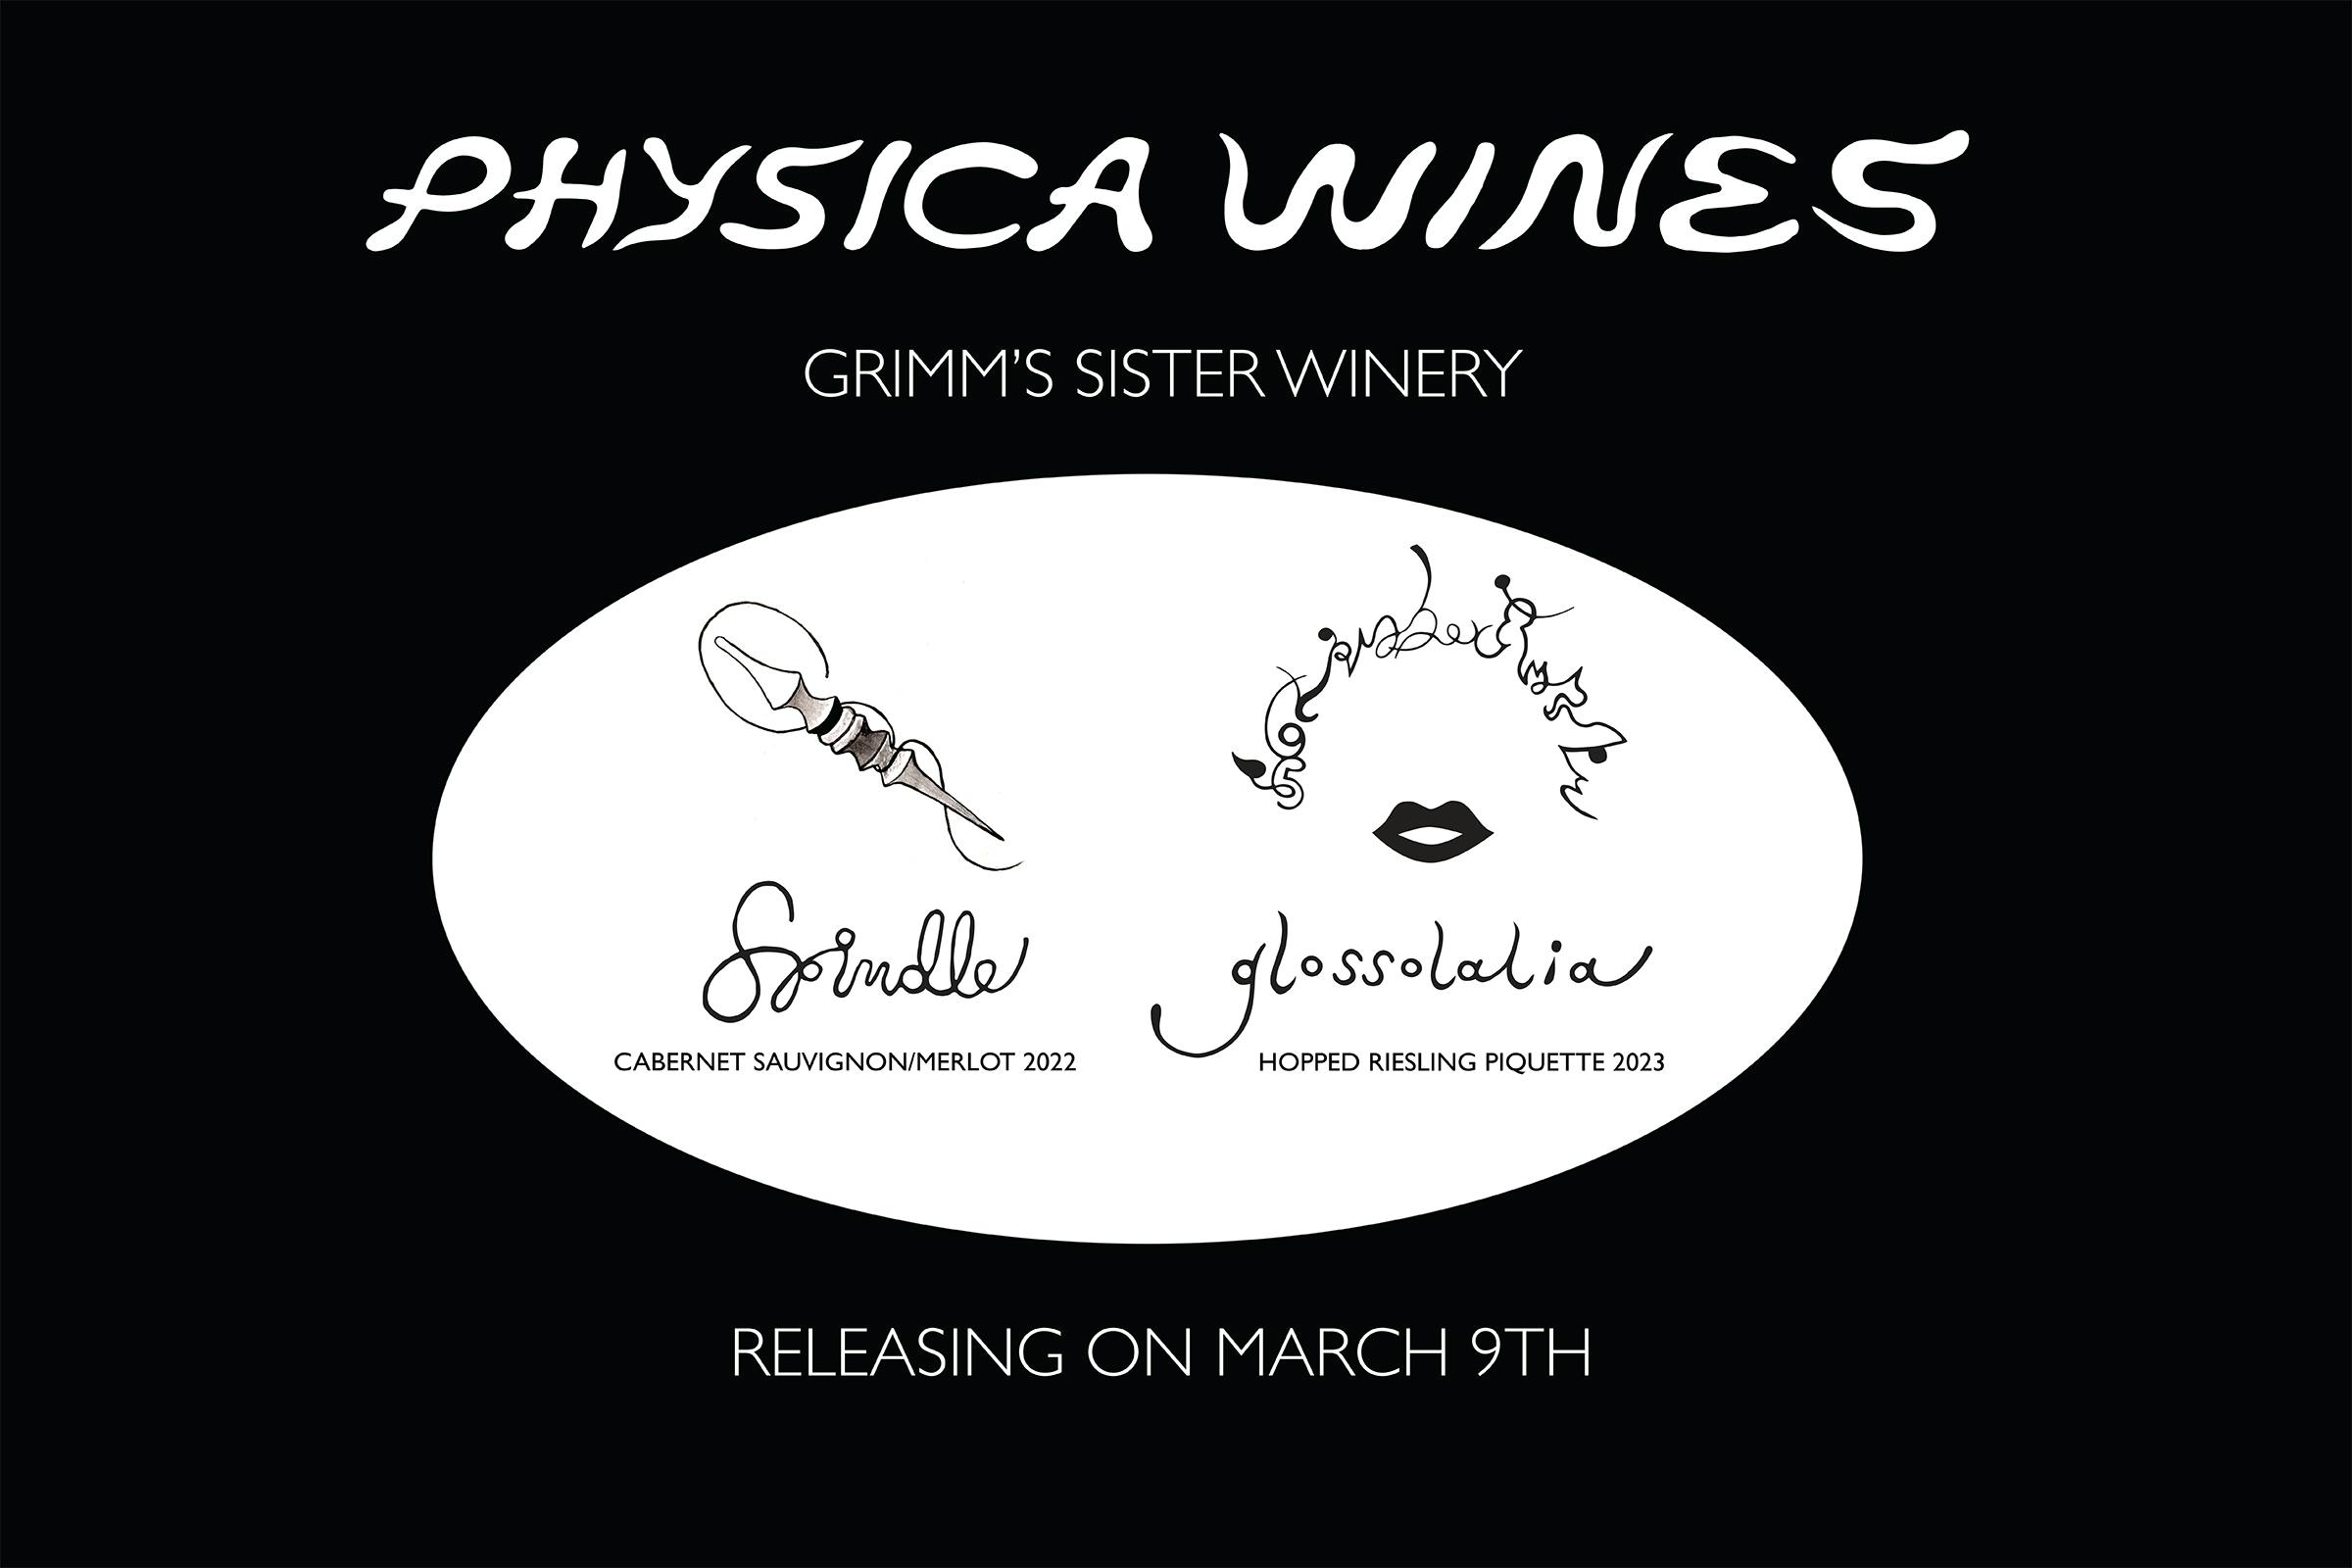 Physica Wines is Grimm's sister winery. On March 9, 2024, we're releasing two new wines! Spindle, a red wine co-ferment with Cabernet Sauvignon and Merlot, and Glossolalia, a piquette hopped with Motueka.